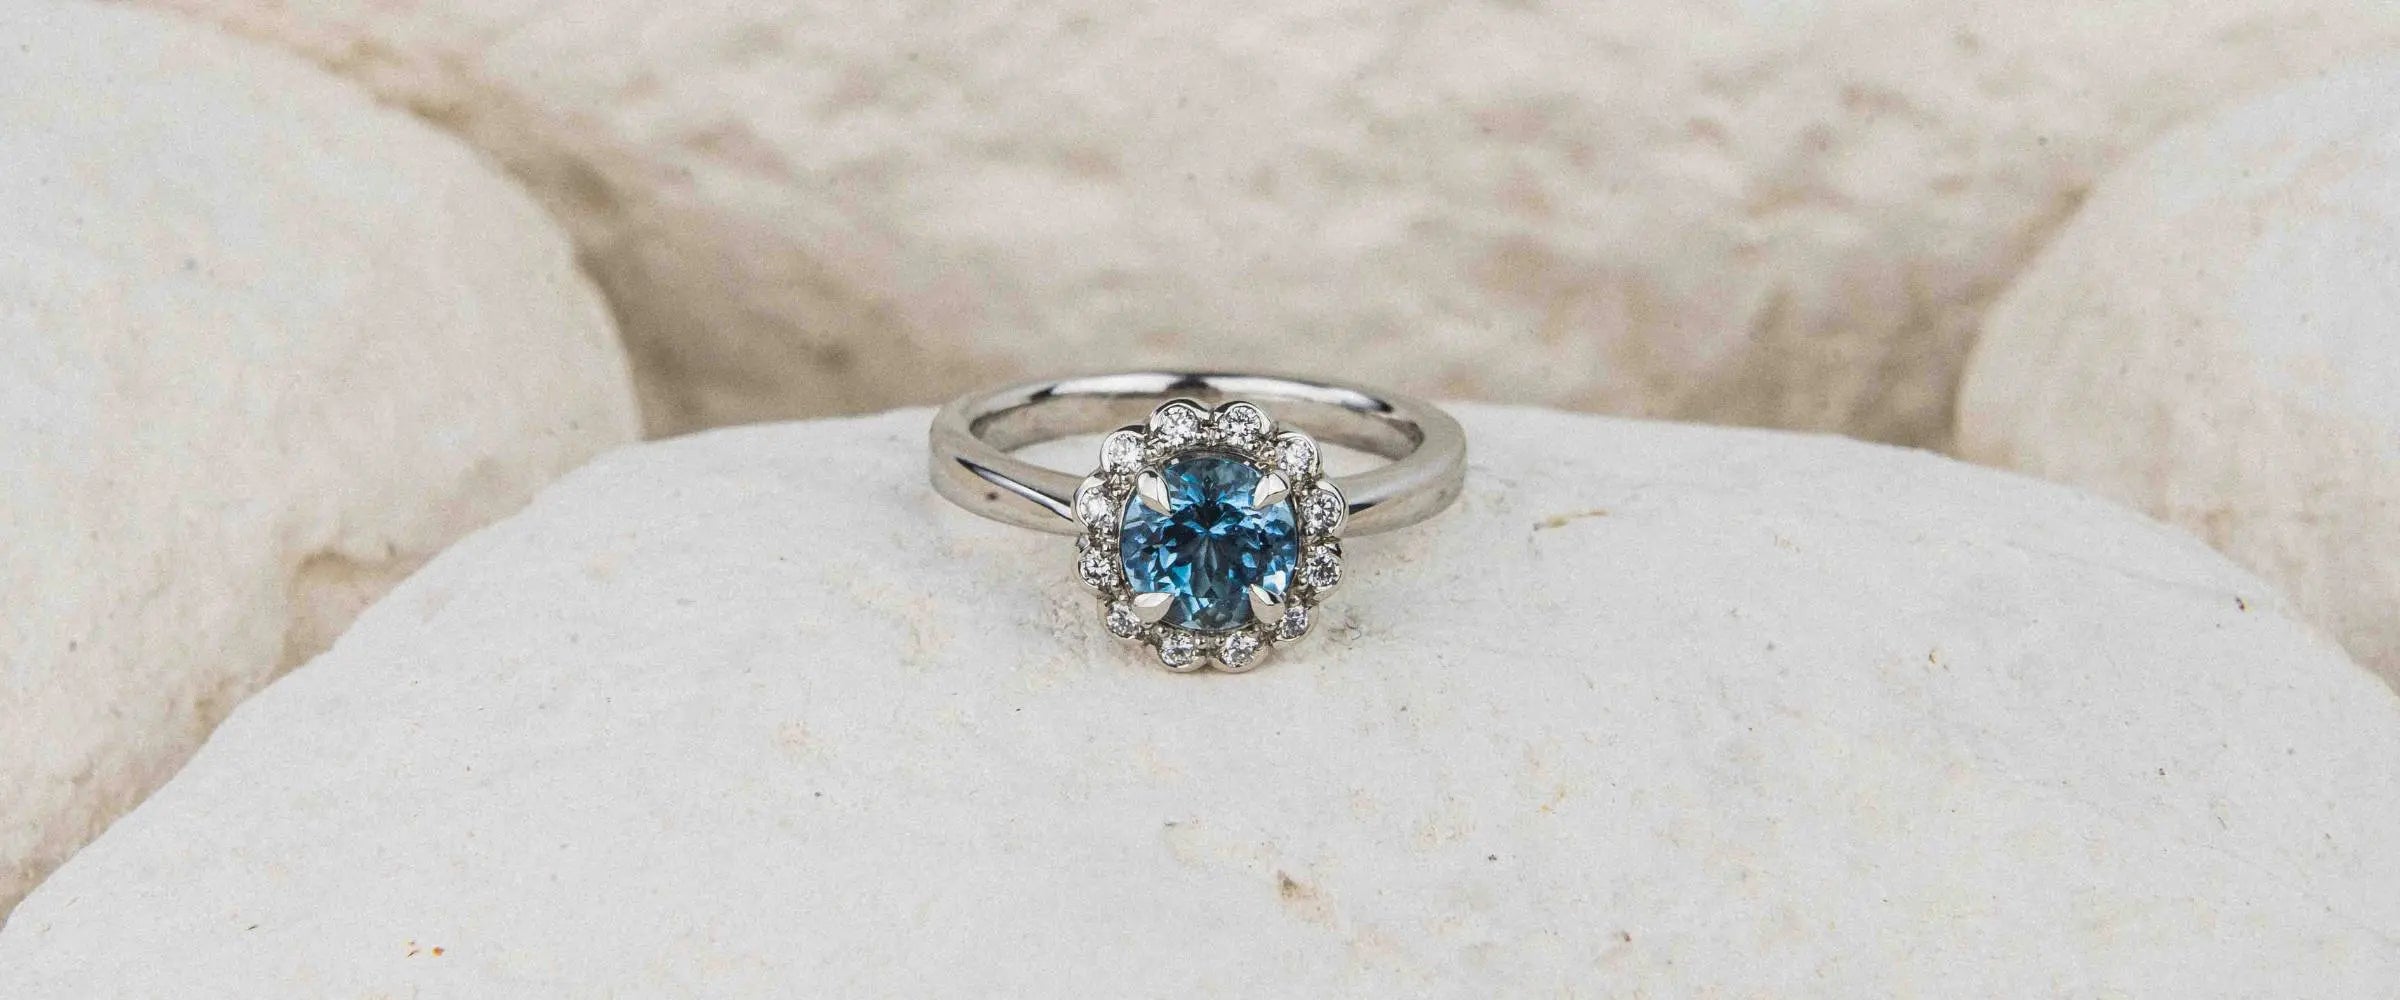 Why Colored Stone Engagement Rings Are Crazy Popular? 6 Gemstone Trends  Millennials Are Loving - Praise Wedding